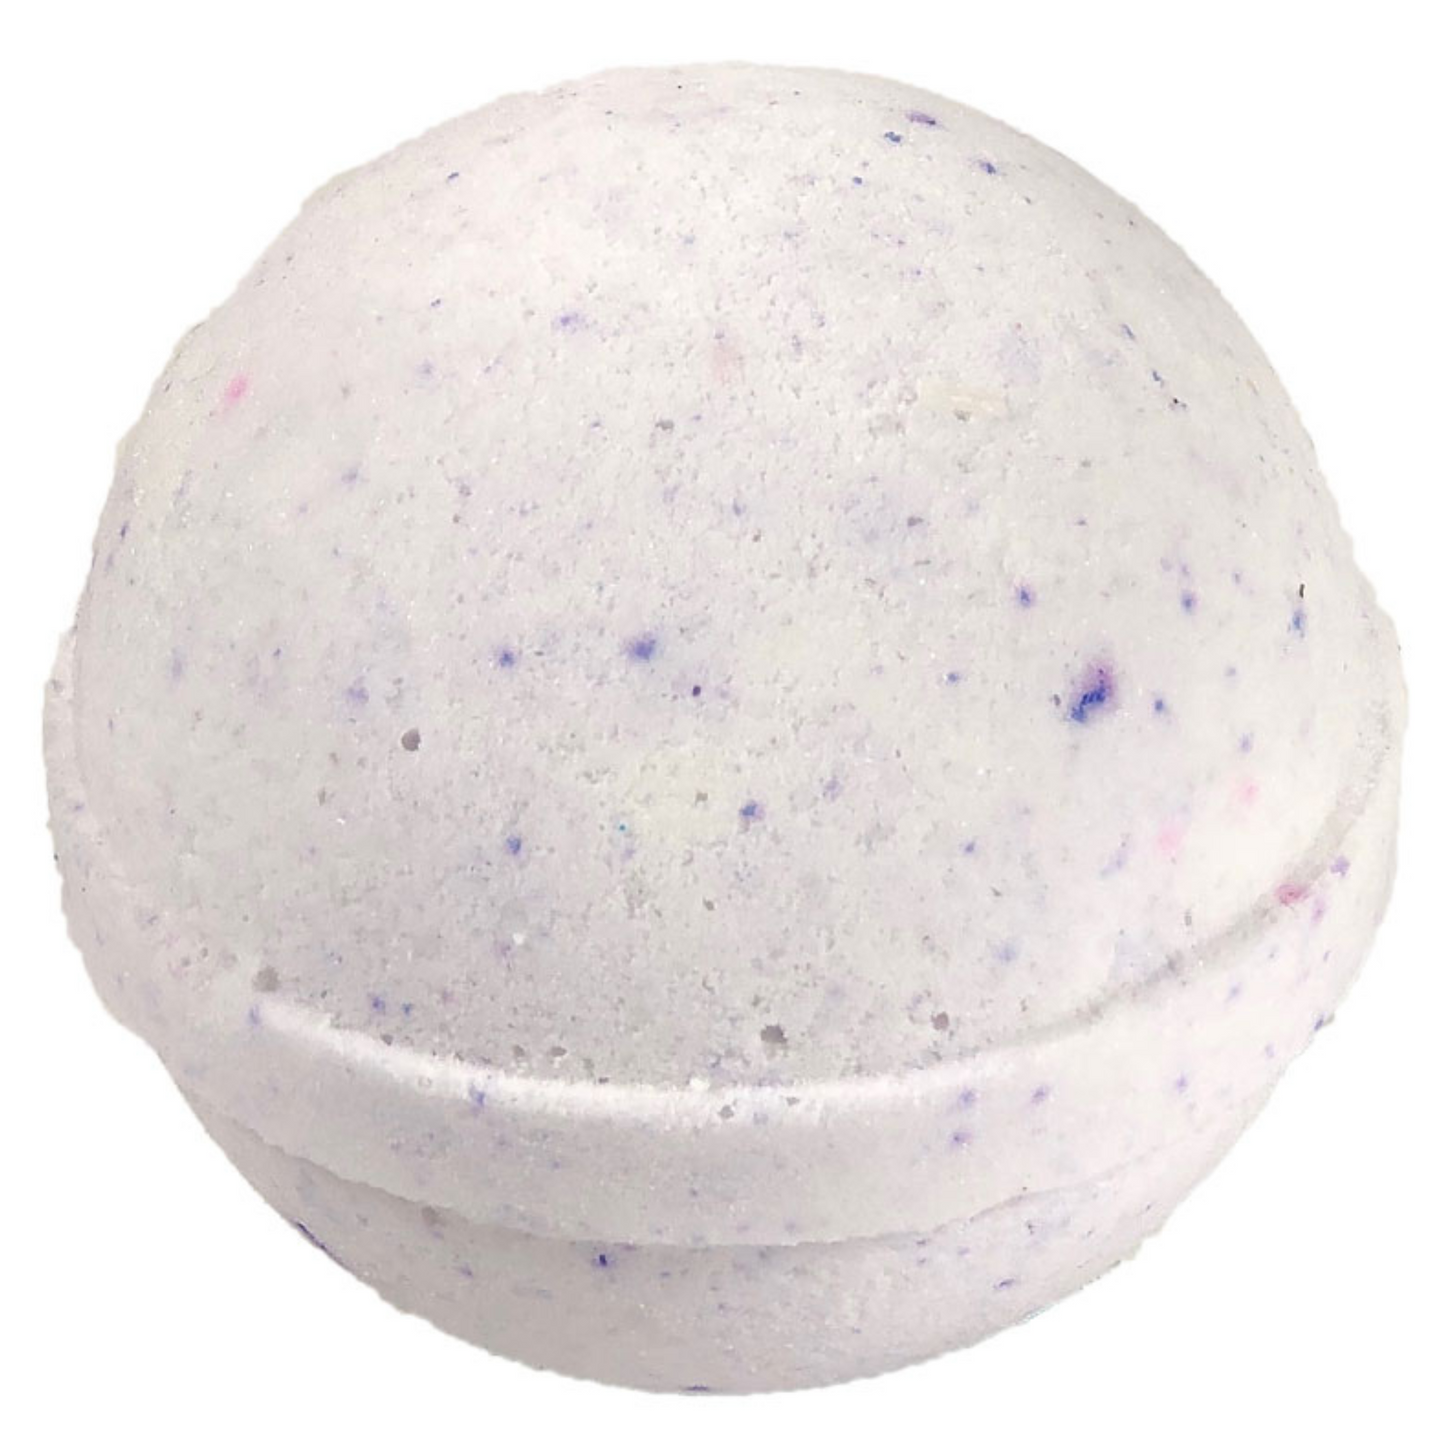 4.5 oz Lavender Bath BombLavender has a delicate sweet smell that is sweetly floral, herbal, and evergreen woody at the same time..